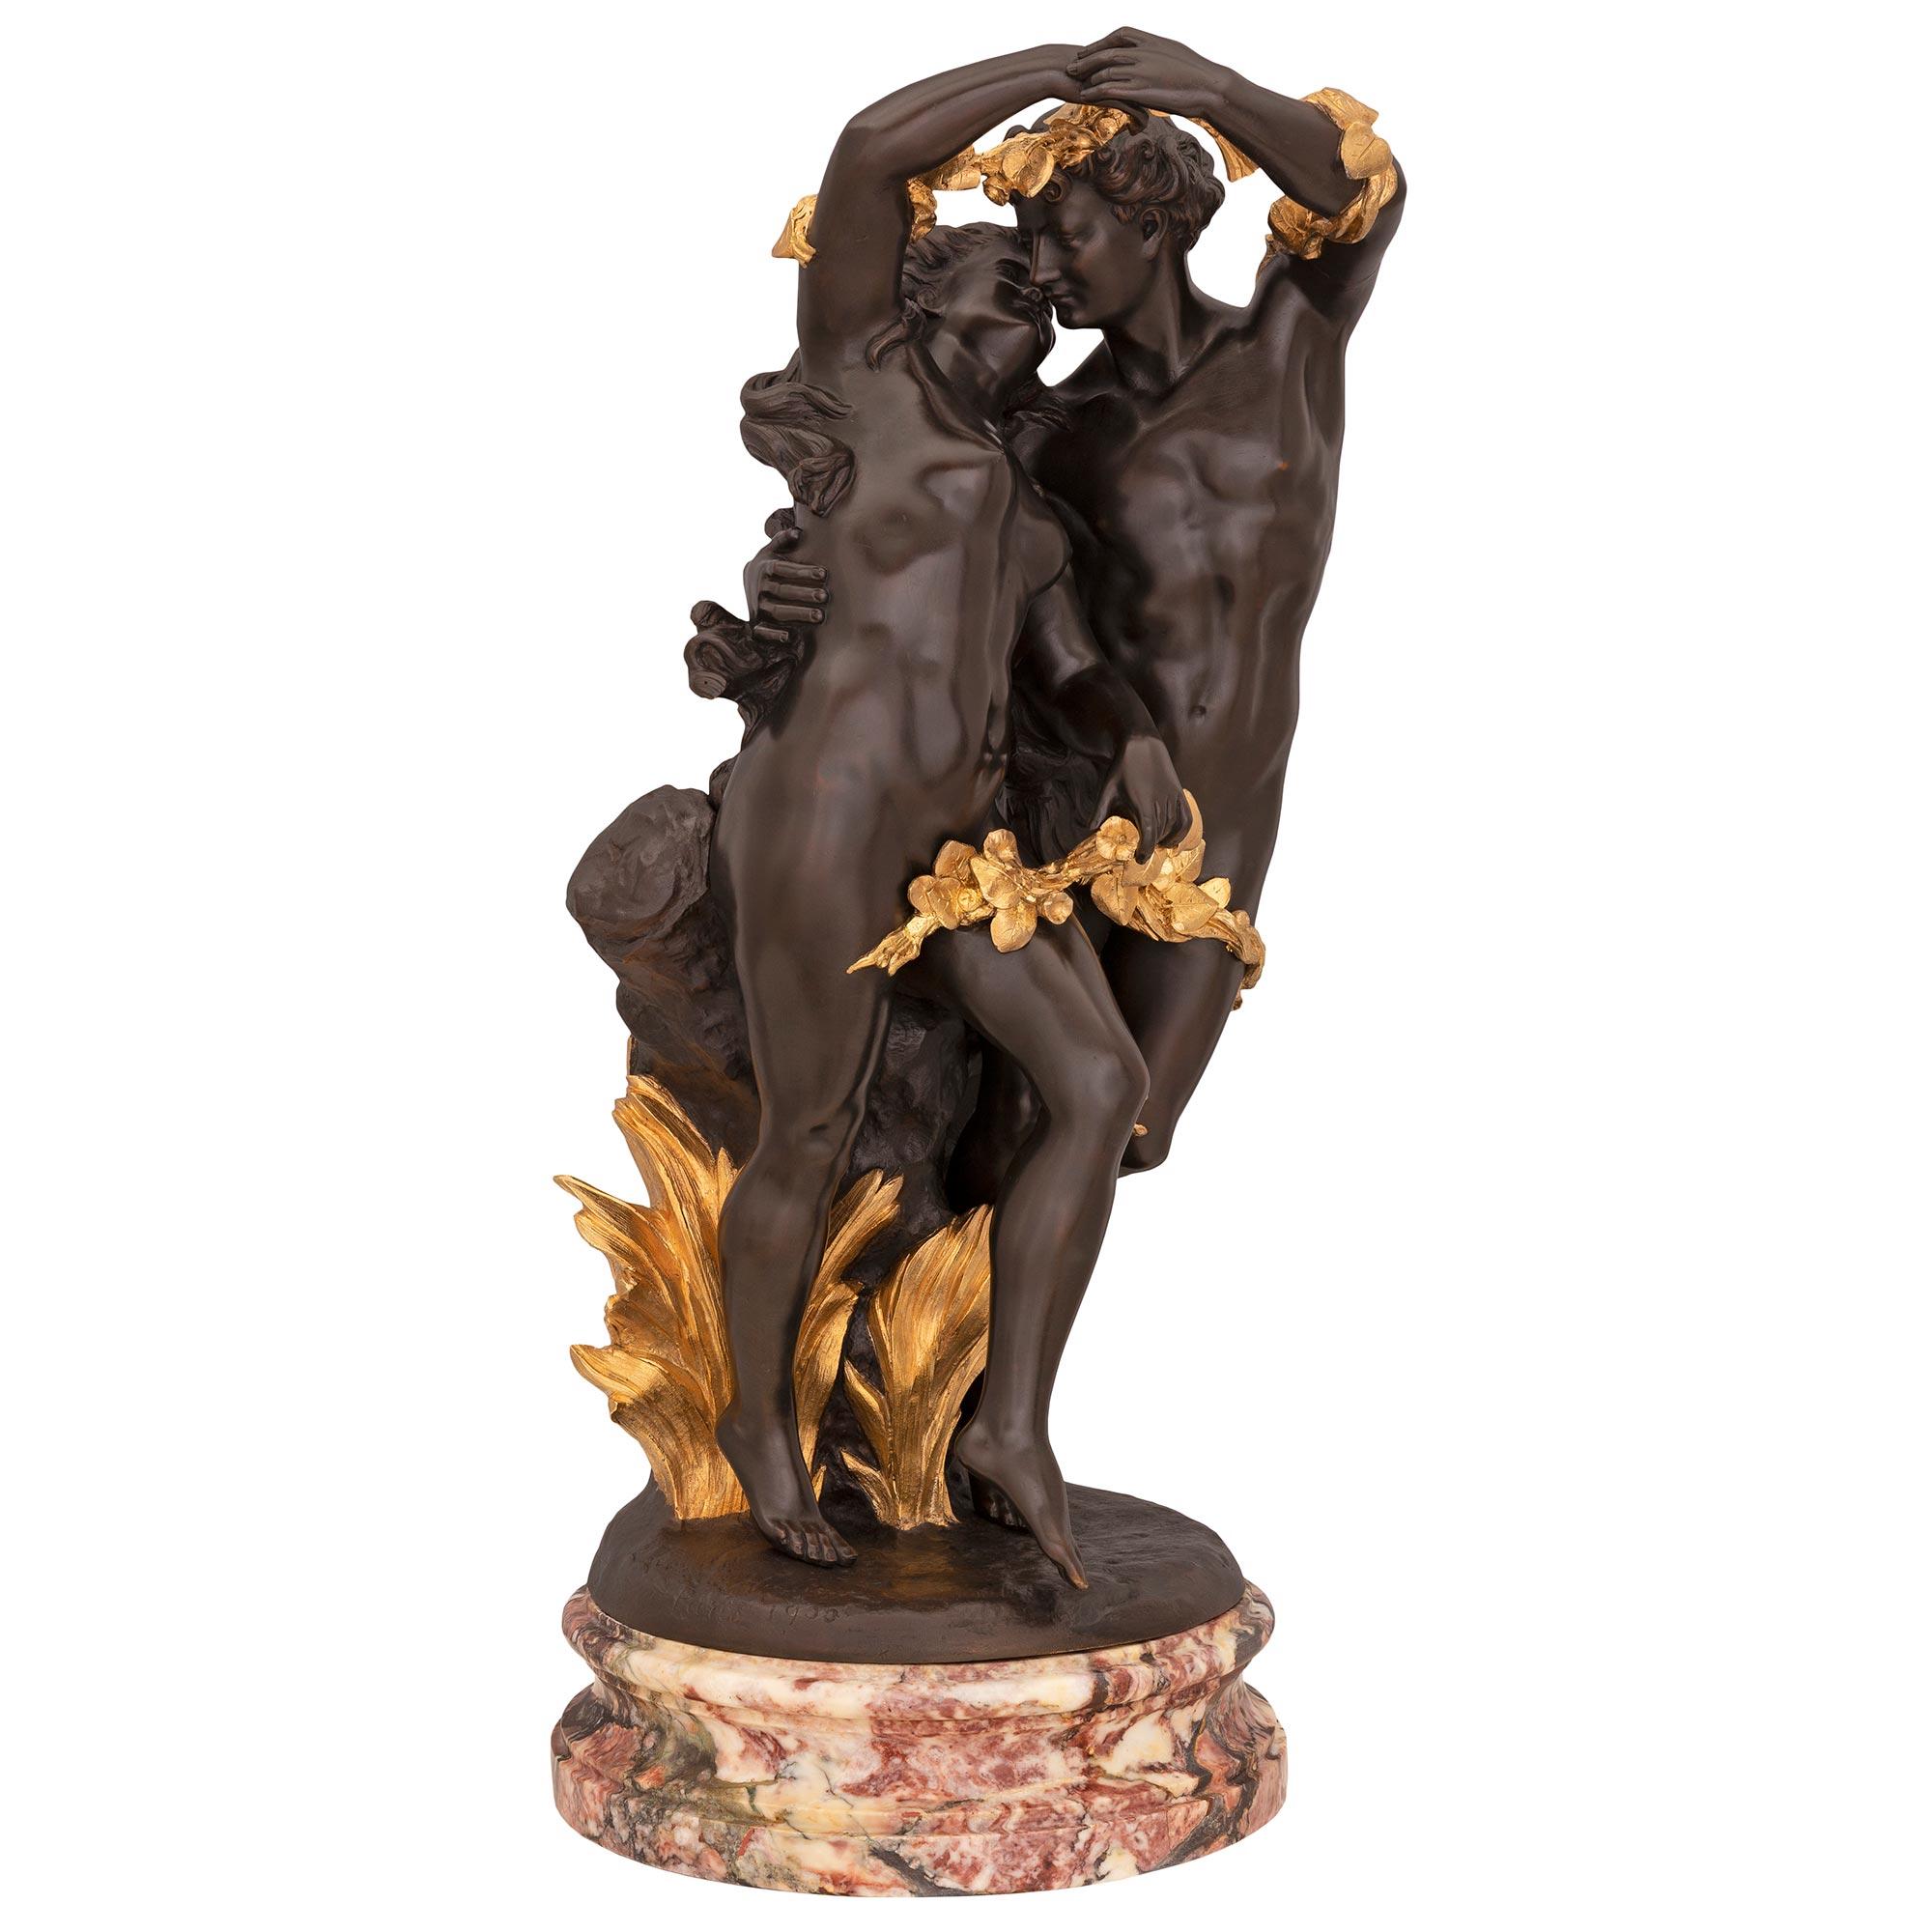 A superb French 19th century Louis XVI st. patinated bronze, ormolu and Serravezza marble statue. The statue is raised by a Fine circular mottled Serravezza marble base where the charming and wonderfully executed naked man and woman are dancing.